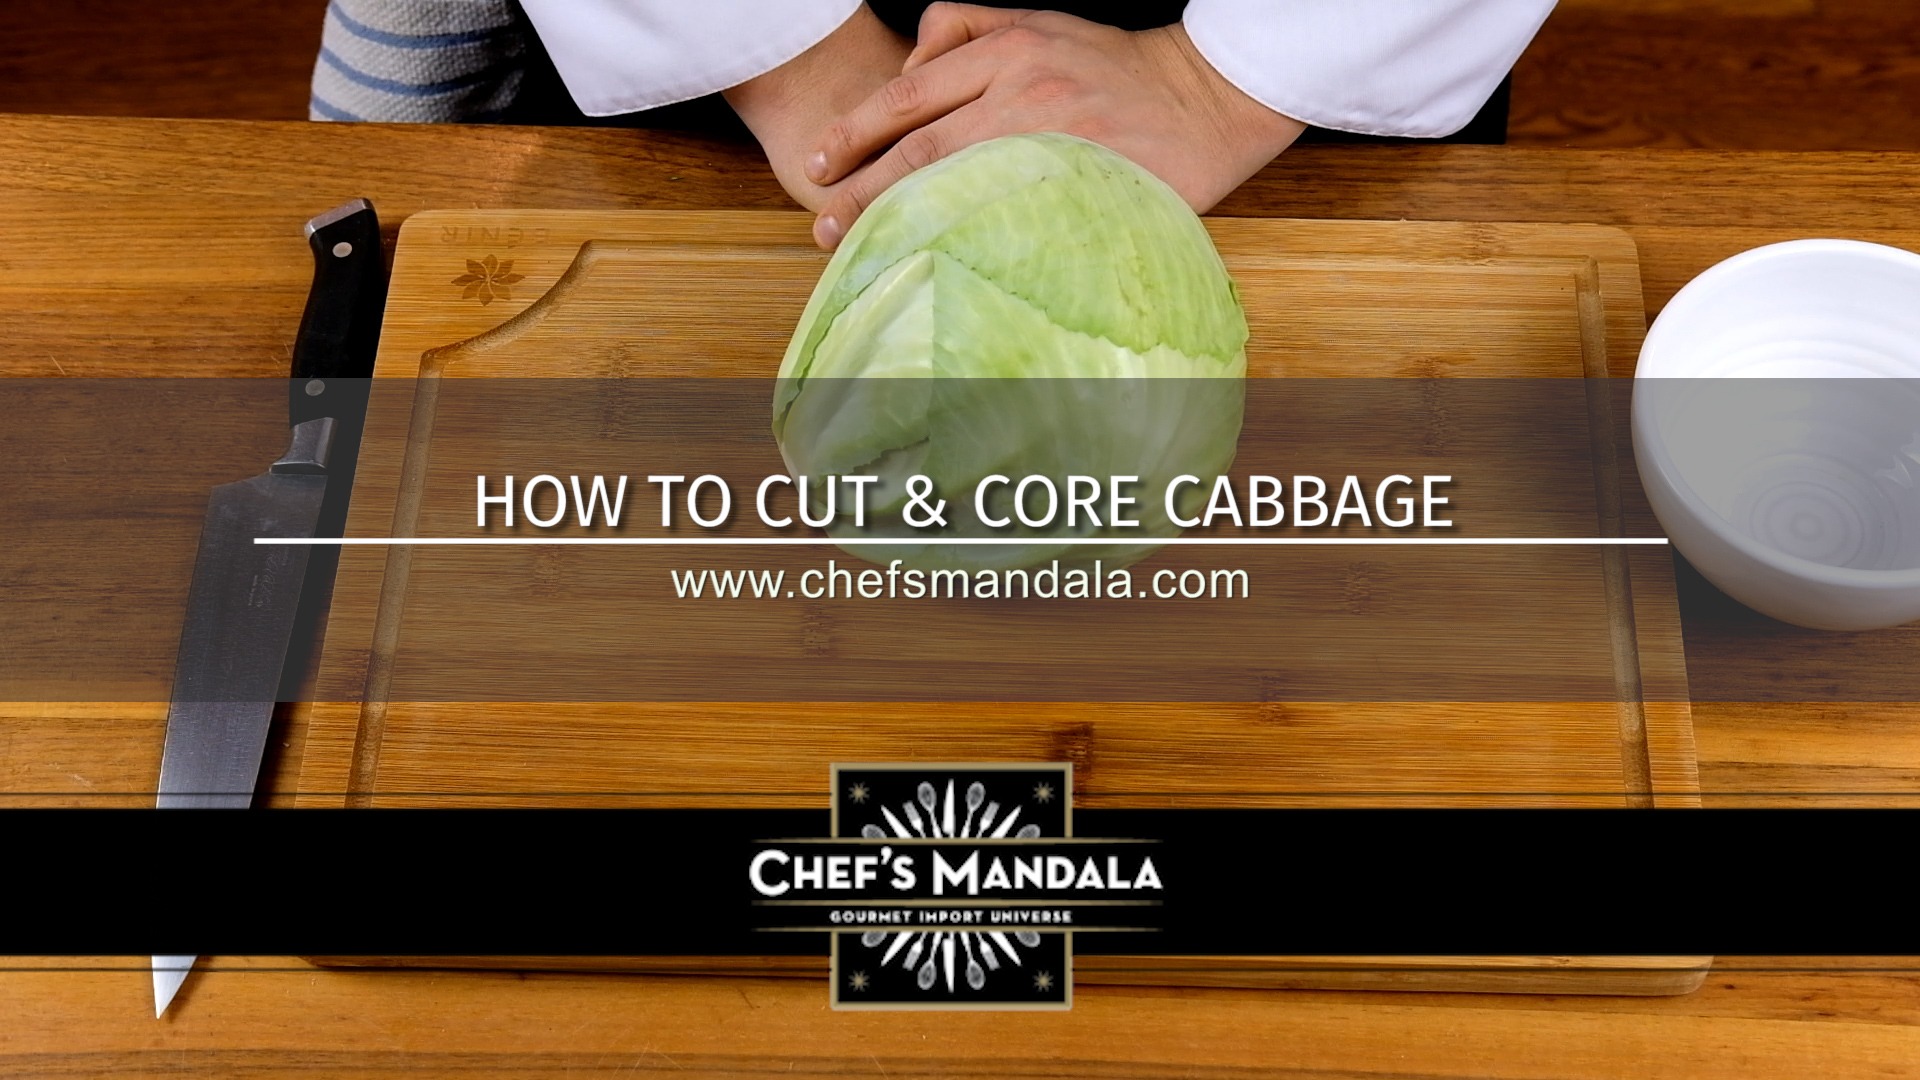 HOW TO CUT & CORE CABBAGE